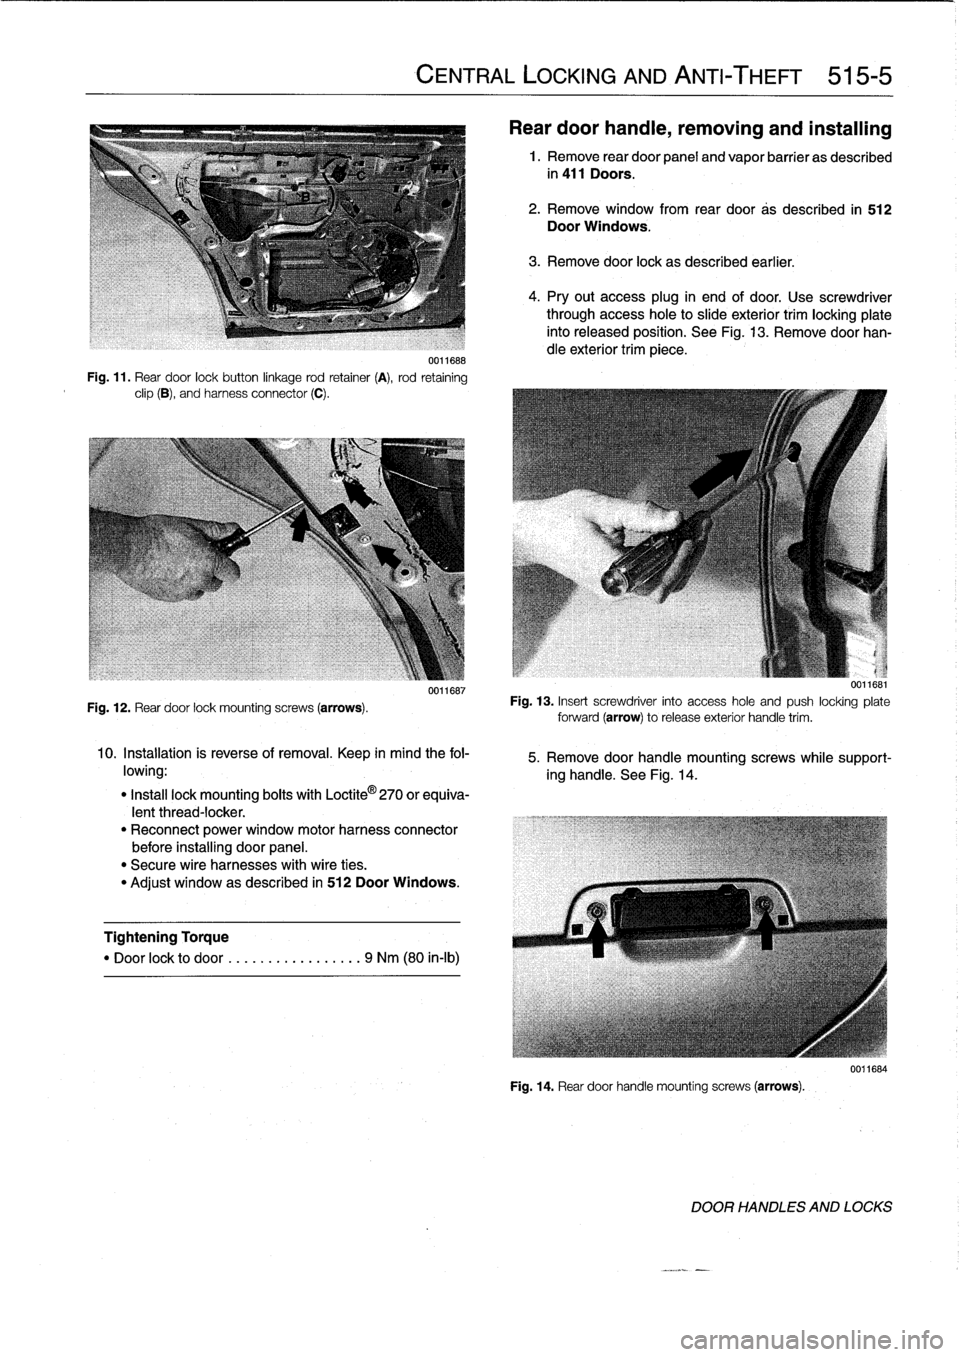 BMW 318i 1997 E36 Owners Manual 
0011688

Fig
.
11
.
Rear
door
lockbutton
linkage
rod
retainer
(A),
rod
retaining
clip
(B),
and
harness
connector
(C)
.

Fig
.
12
.
Rear
door
lock
mounting
screws
(arrows)
.

0011687

10
.
Installatio